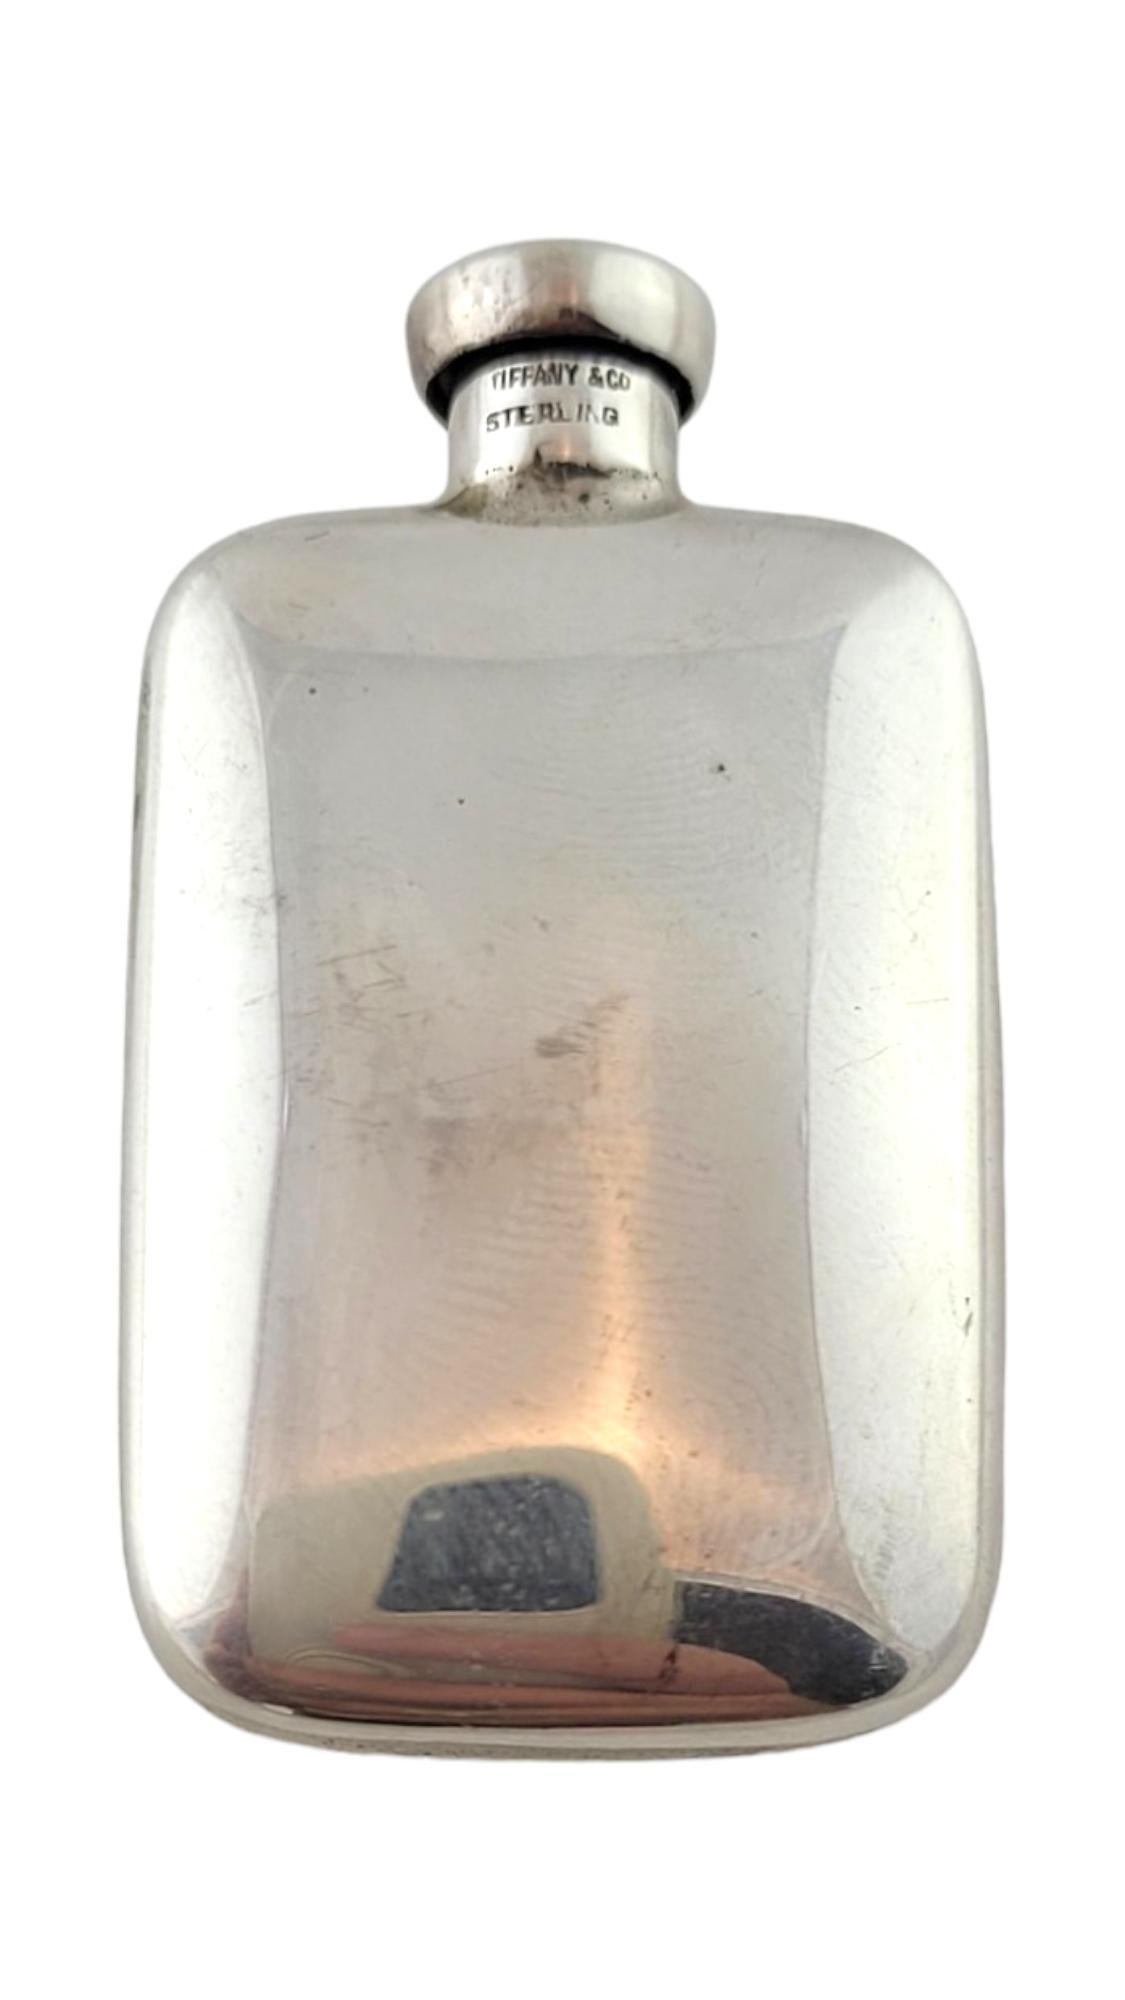 Women's Vintage Tiffany & Co. Sterling Silver Engraved Perfume Flask #17411 For Sale